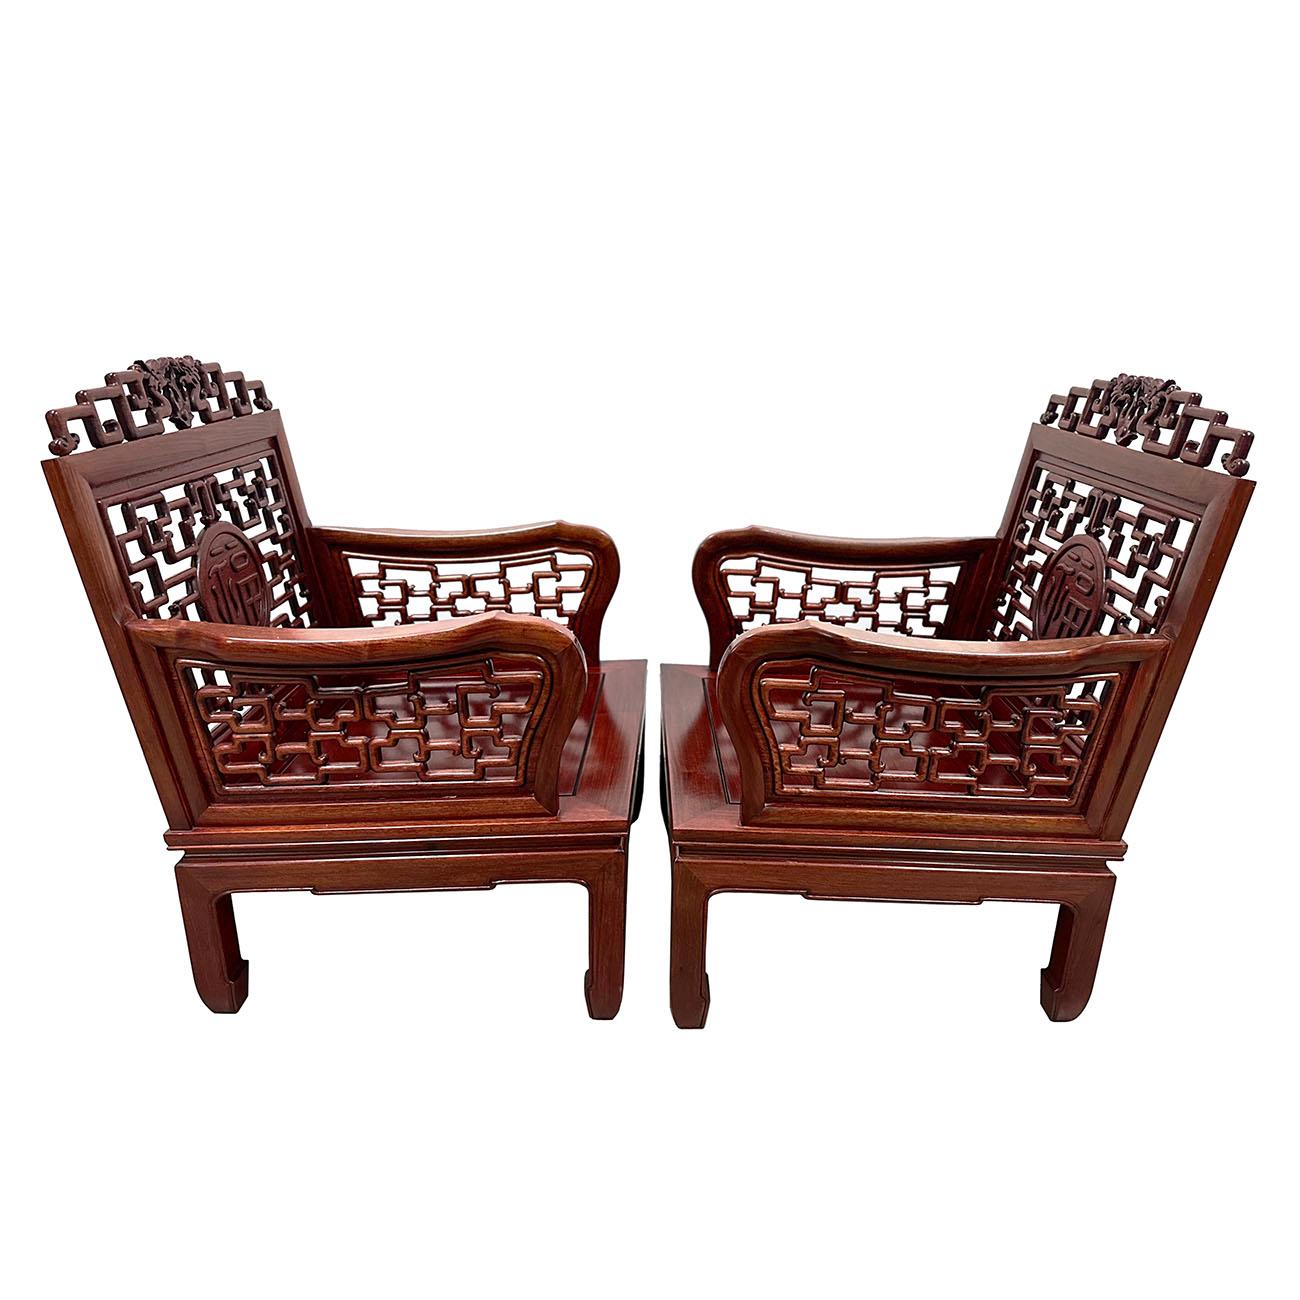 Mid 20th Century Vintage Chinese Carved Rosewood Living Room Chairs Set In Good Condition For Sale In Pomona, CA